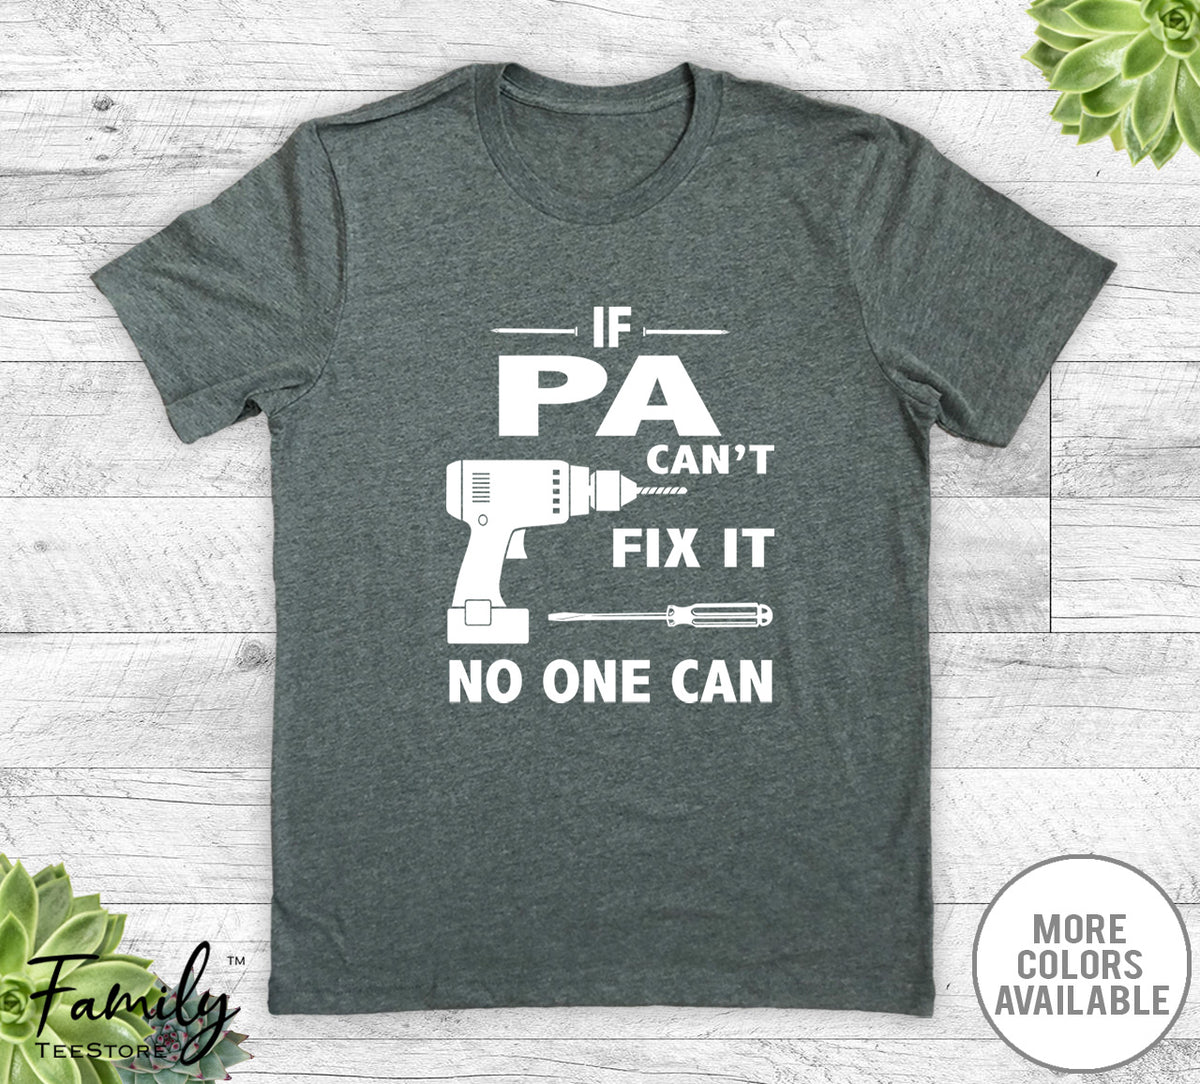 If Pa Can't Fix It No One Can - Unisex T-shirt - Pa Shirt - Pa Gift - familyteeprints